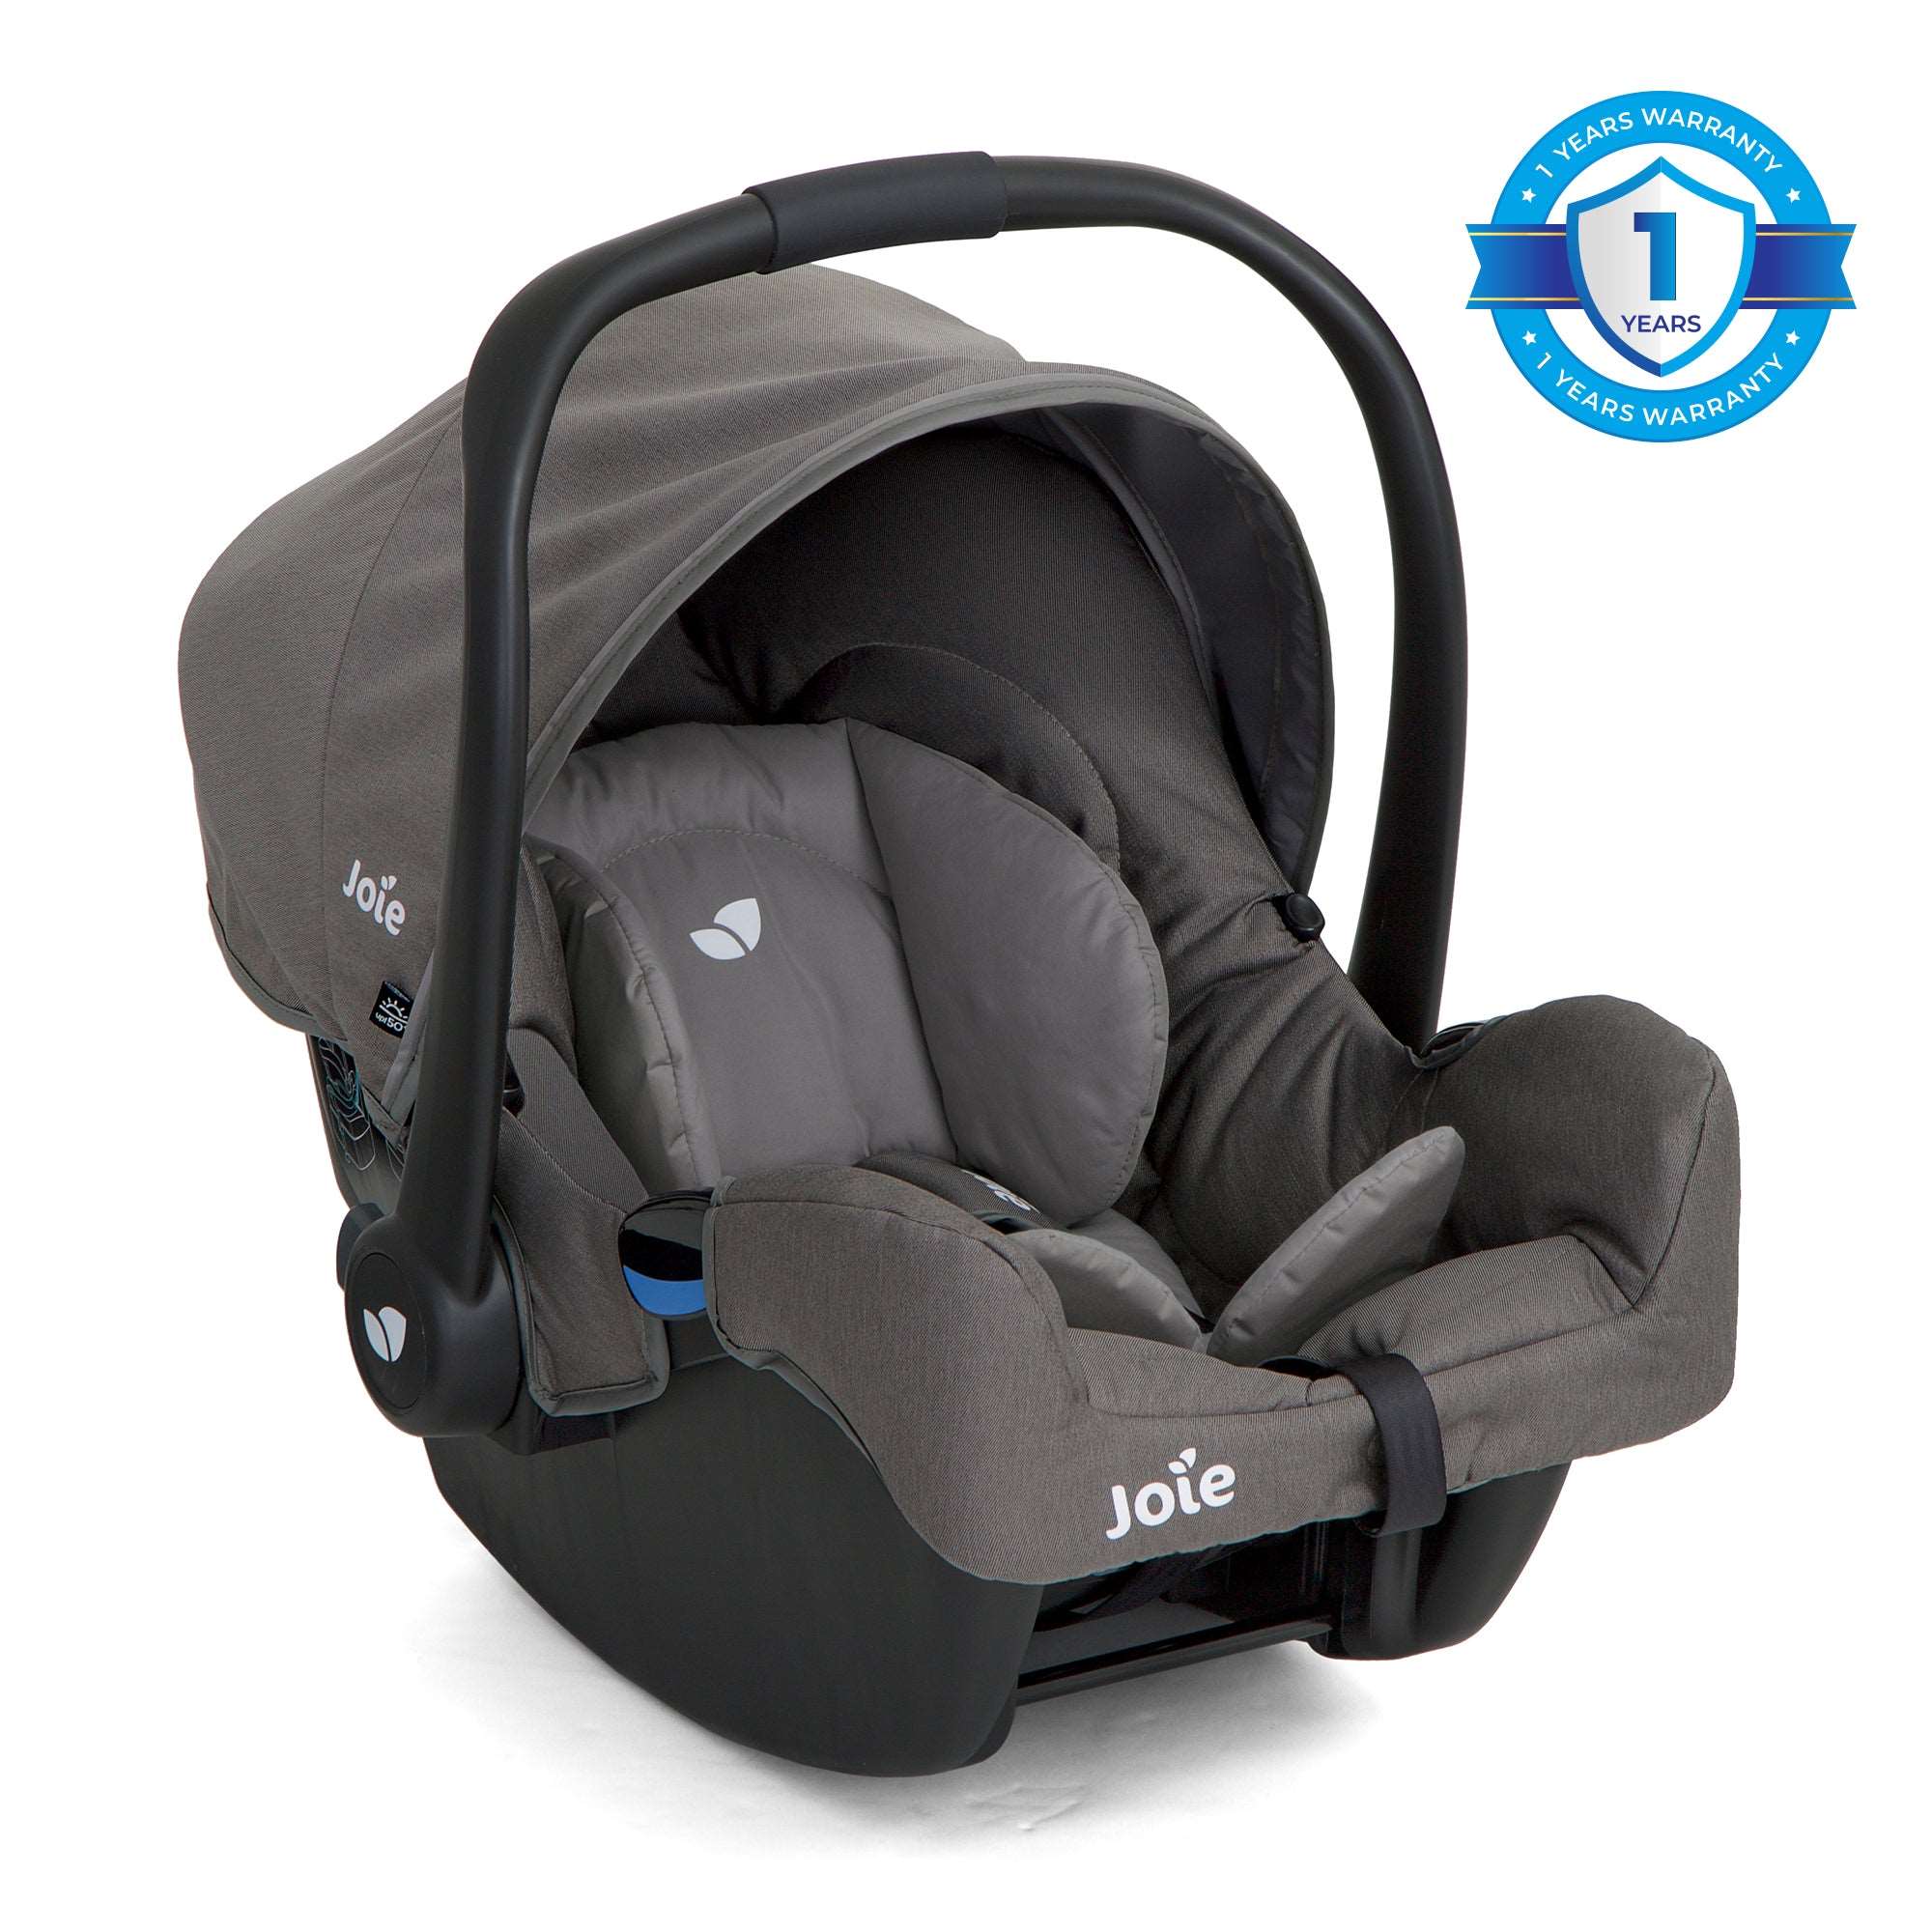 Joie Gemm Color Infant Carrier || Fashion - Foggy Grey || Birth+ to 12months - Toys4All.in